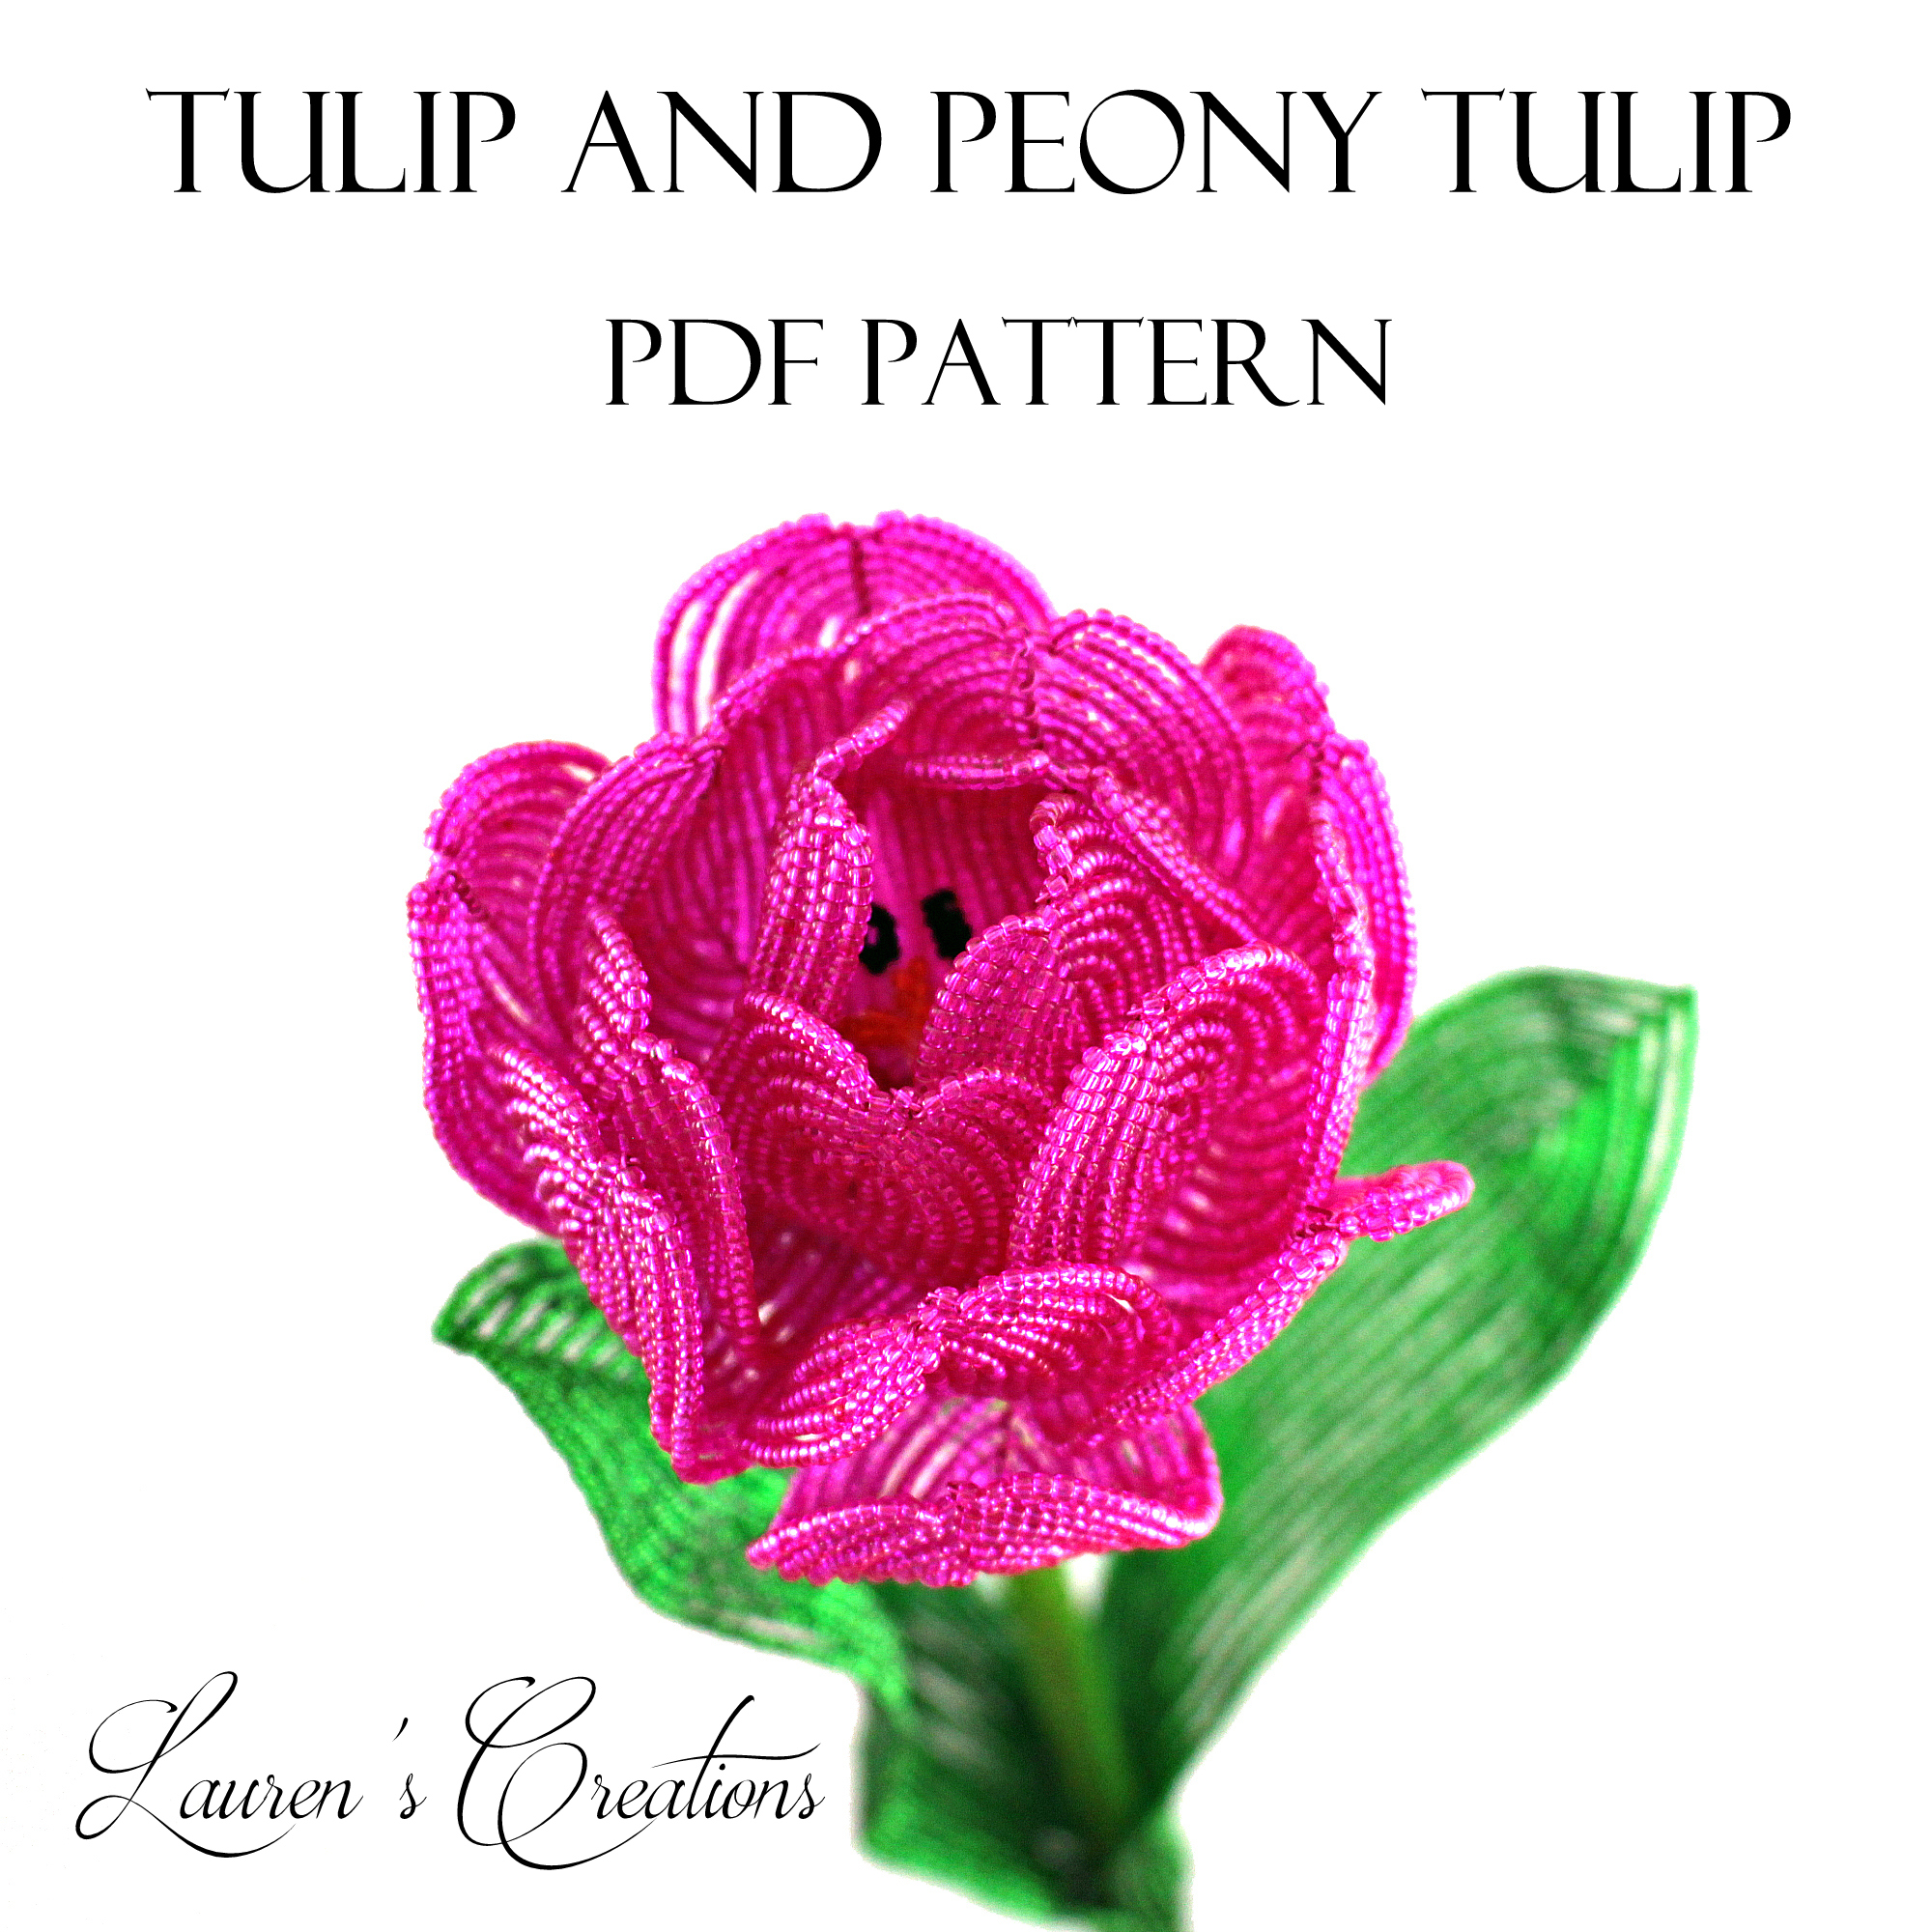 French Beaded Tulip and Peony Tulip Pattern